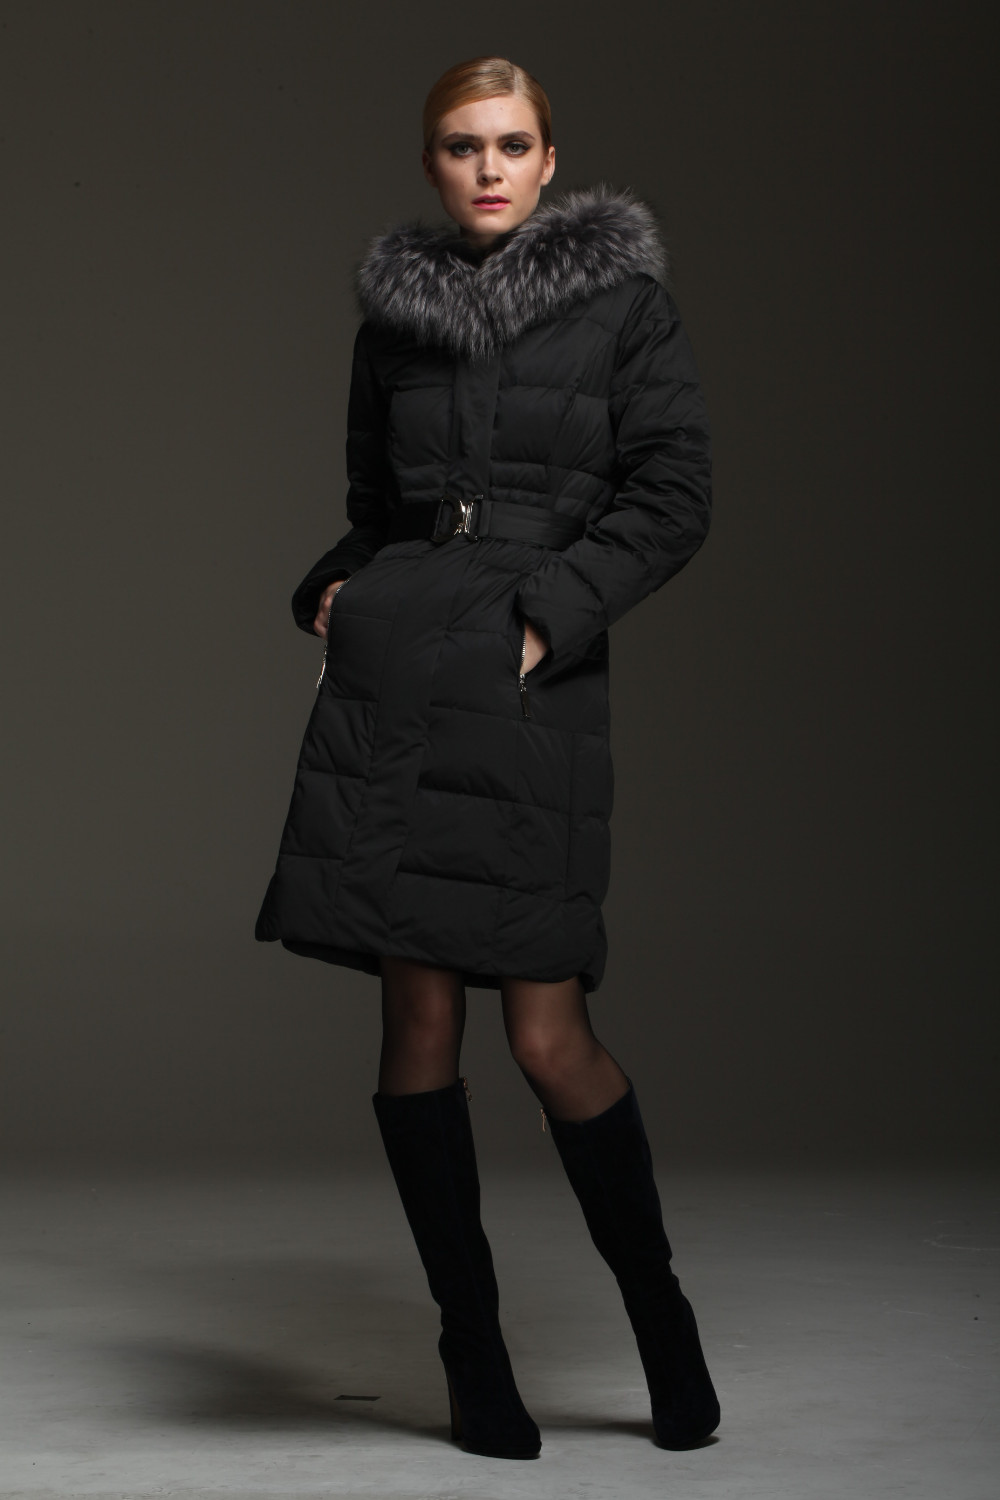 Basic-Editions-Genuine-Brand-Fashion-new-winter-jacket-parkas-for-women-Down-amp-Parkas---13W-54--2043039711